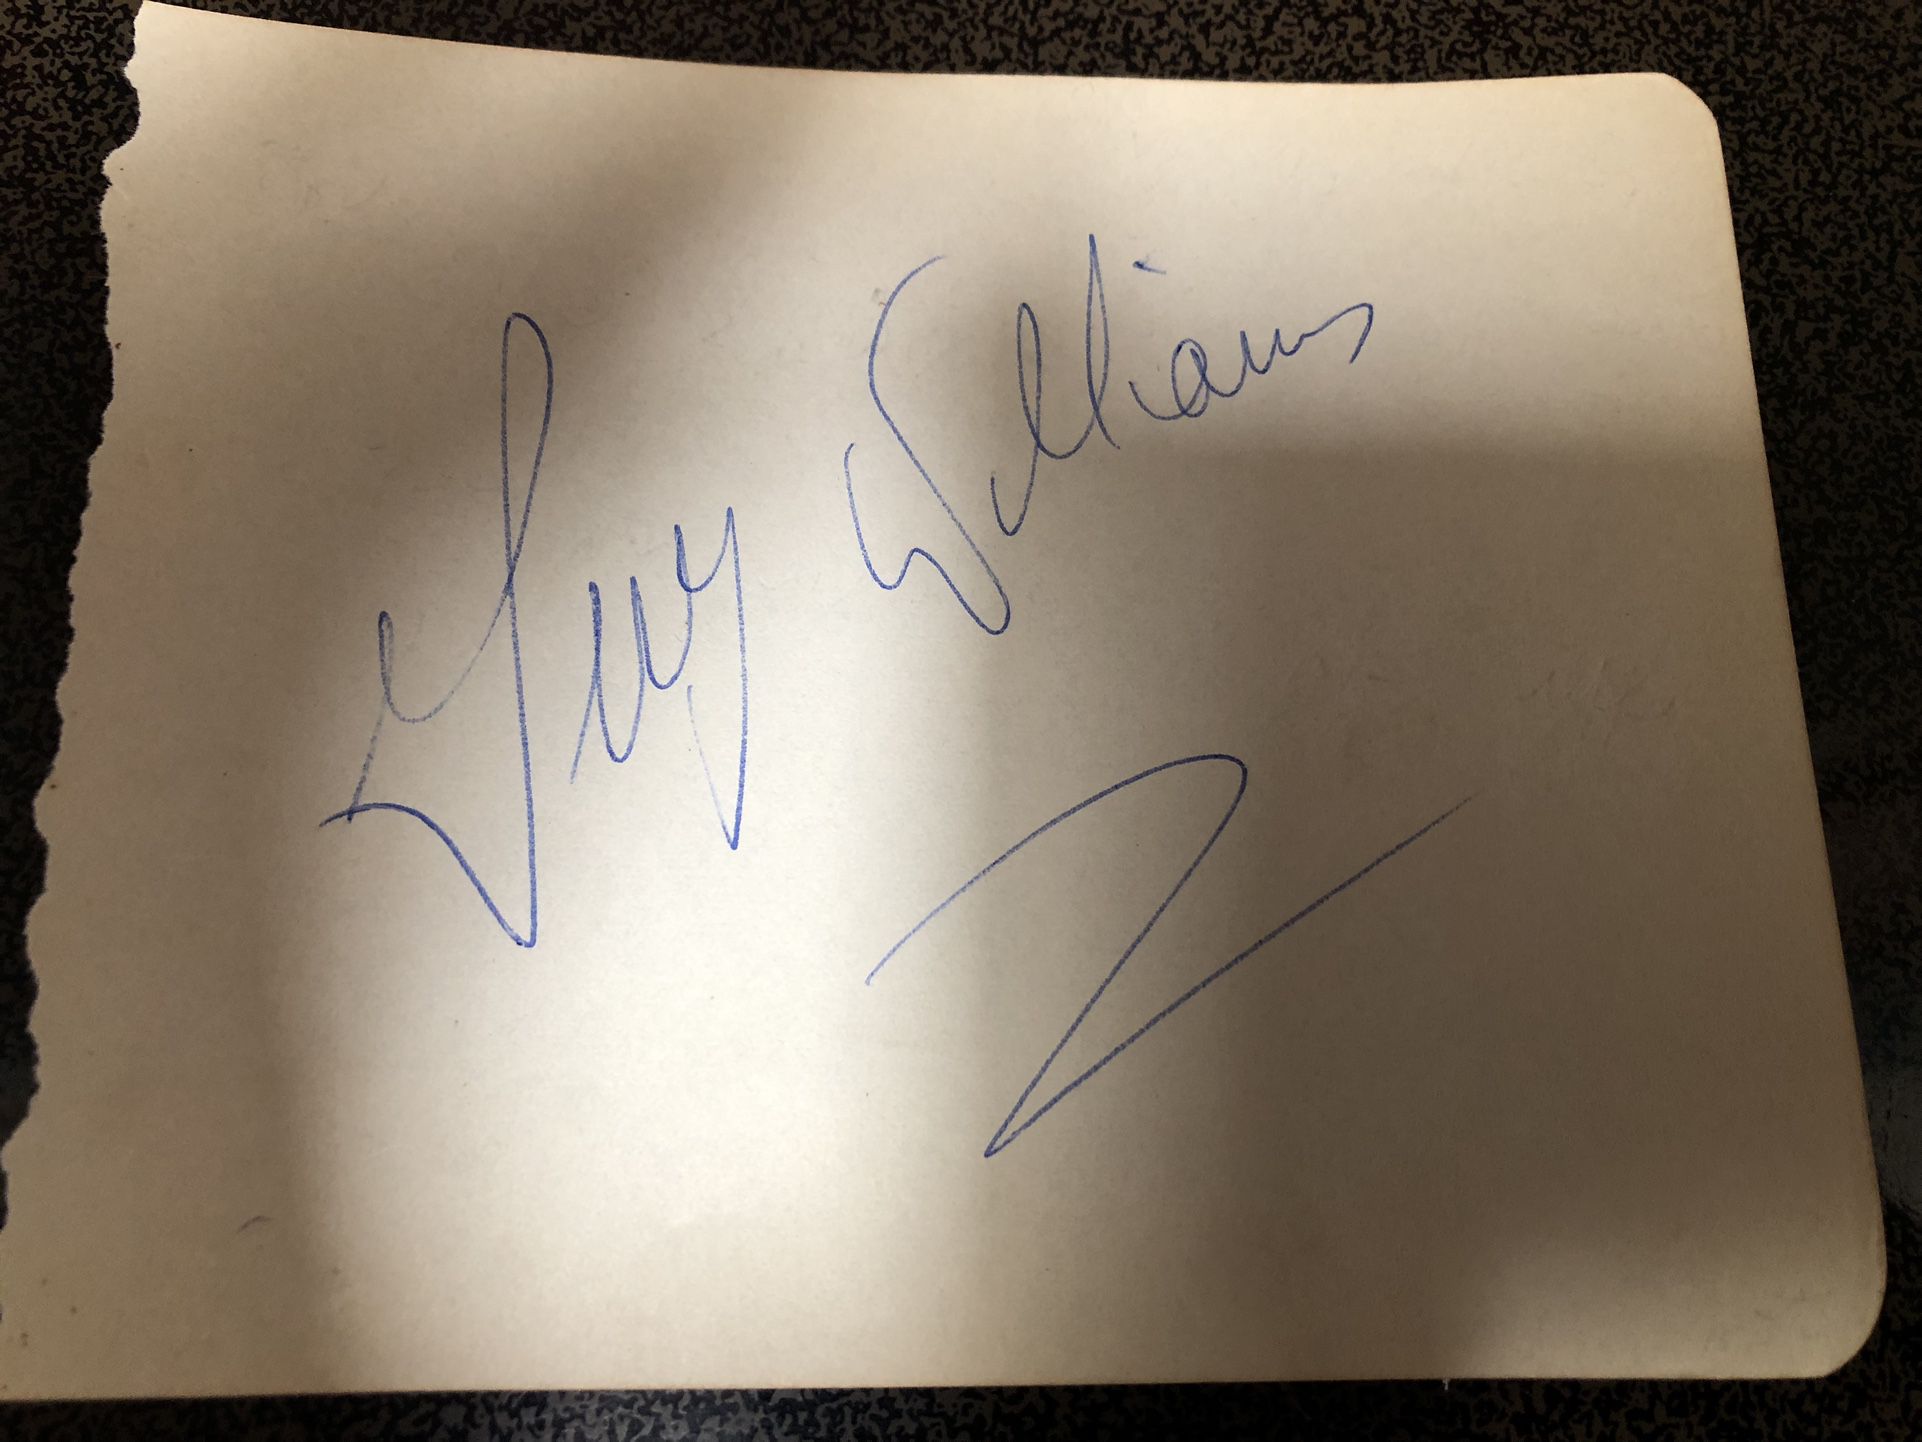 Disney Zorro & Lost in Space Guy Williams Autograph Signed Page